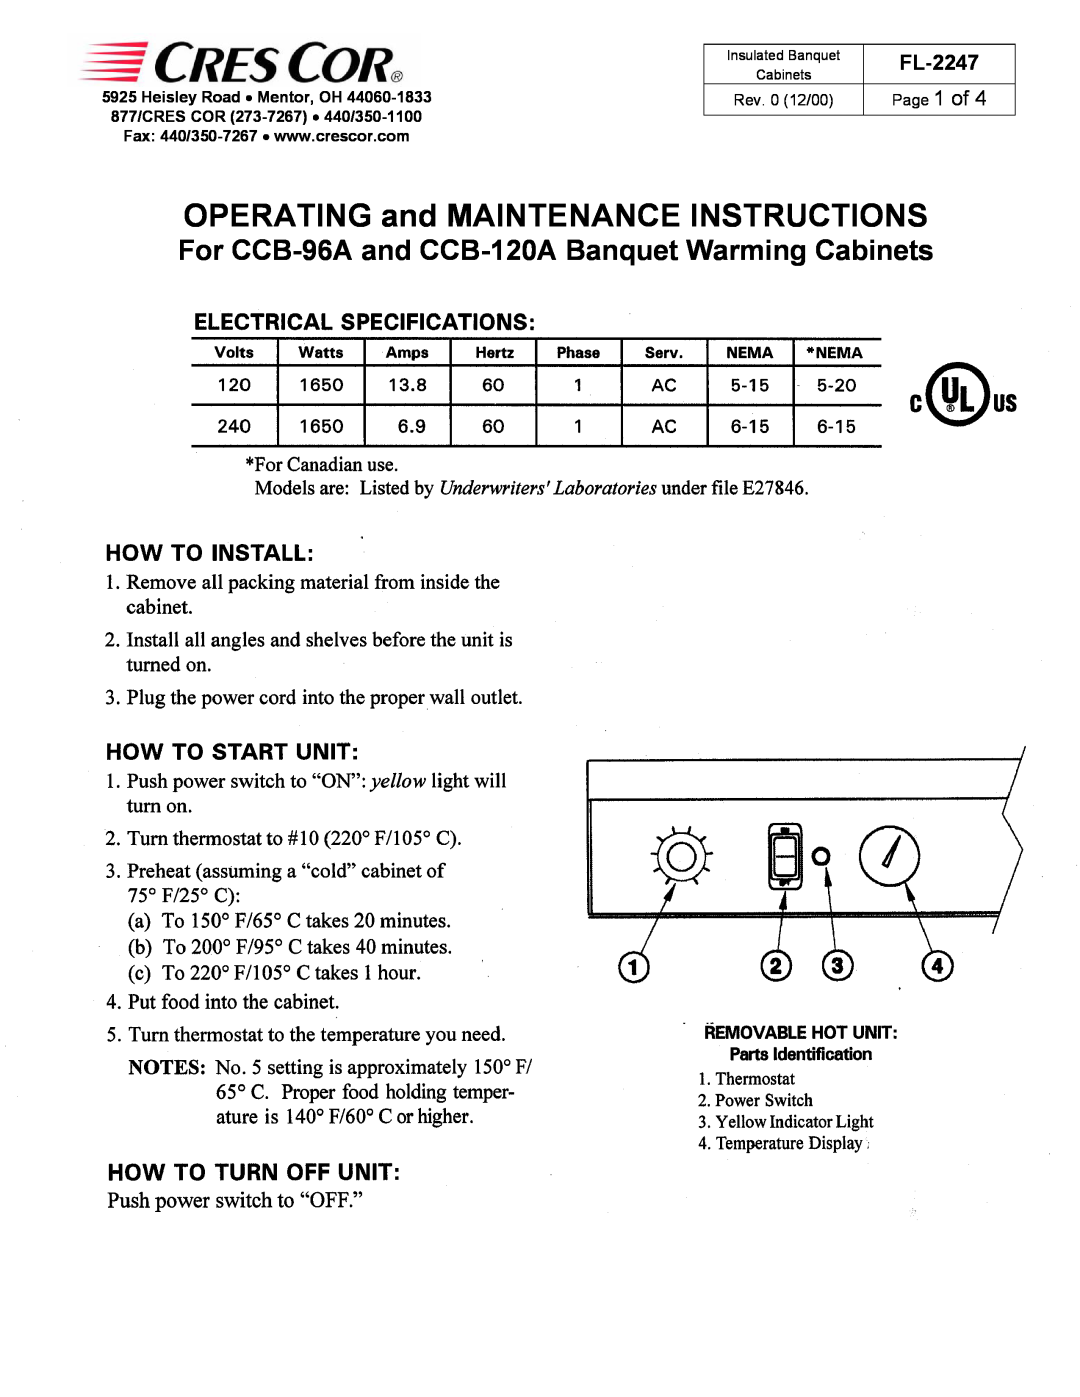 Cres Cor manual OPERATING and MAINTENANCE INSTRUCTIONS, For CCB-96Aand CCB-120ABanquet Warming Cabinets, FL-2247 